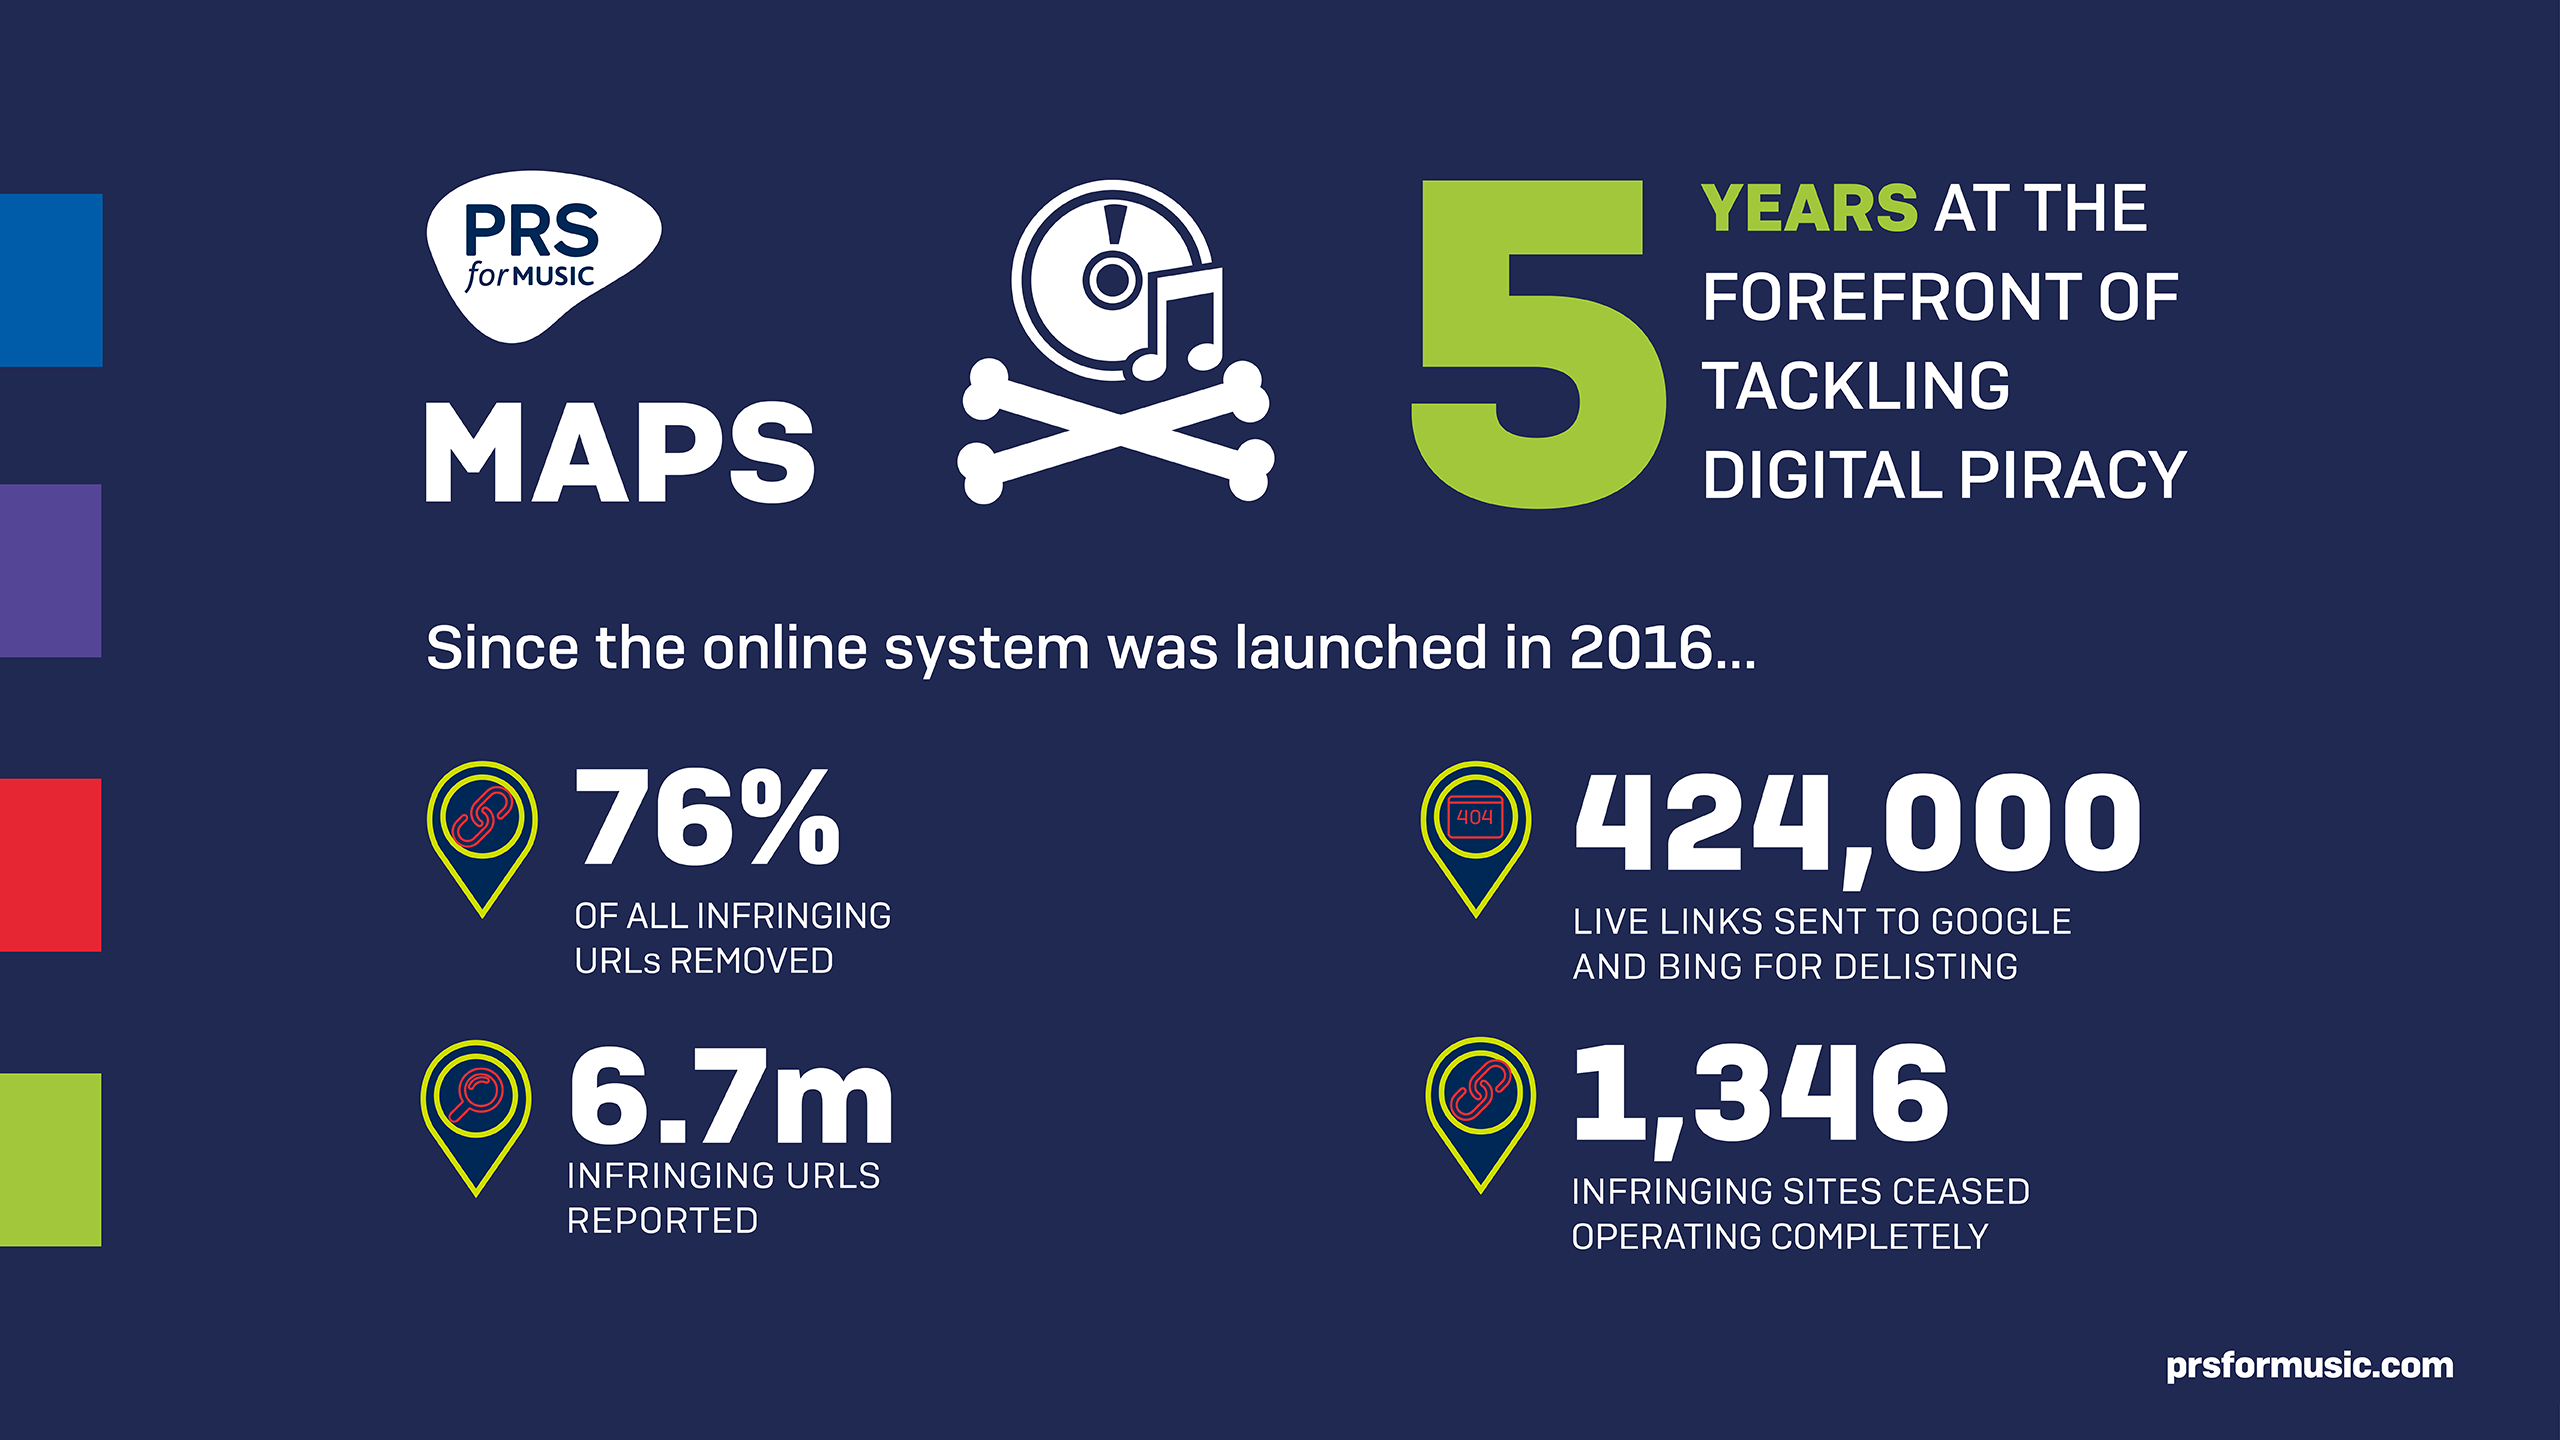 Infographic shows figures demonstrating the success of MAPS 